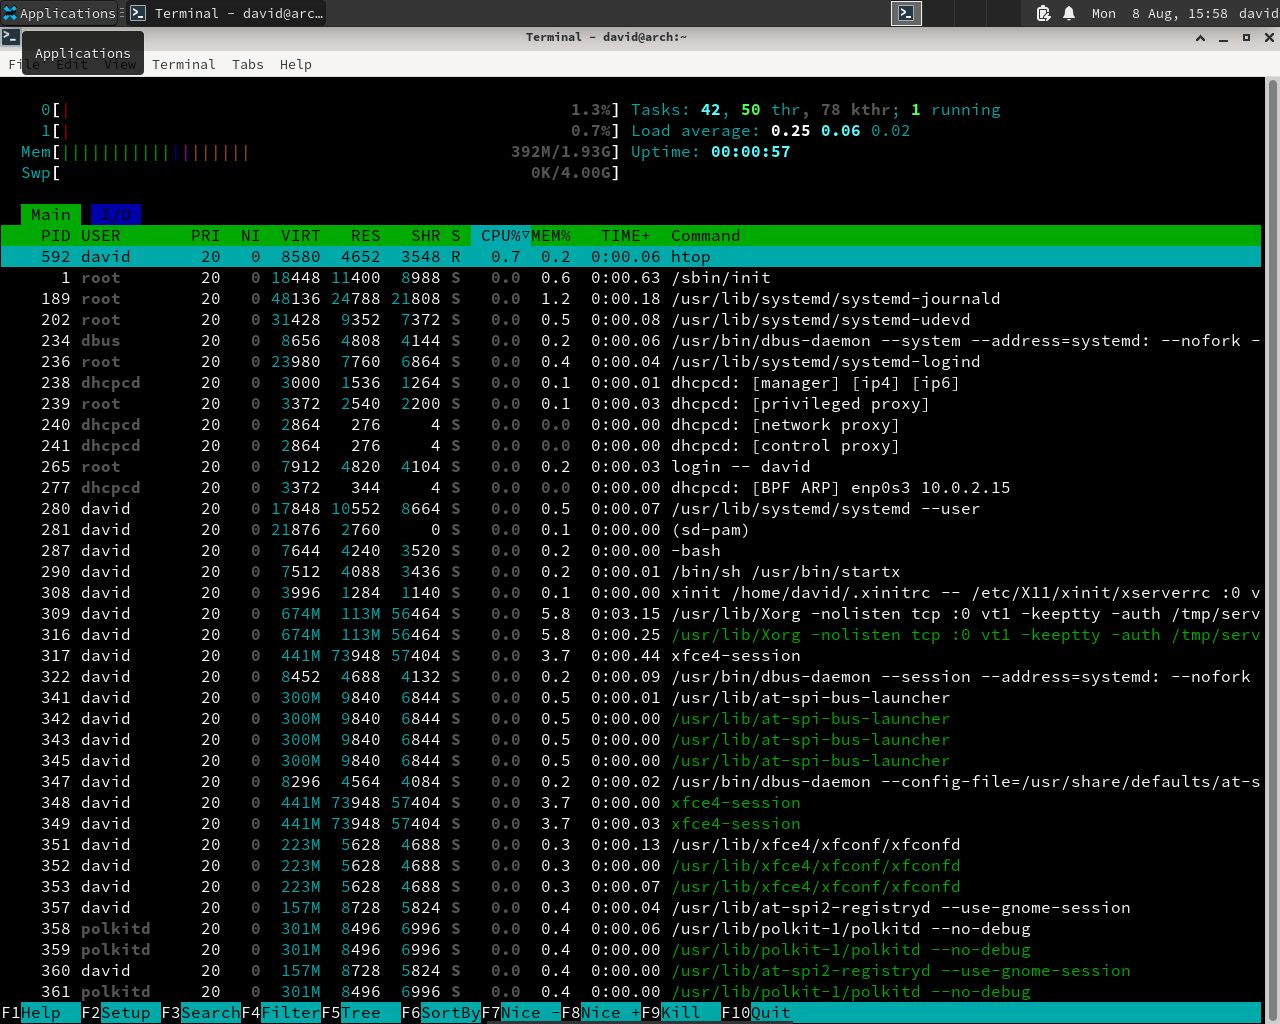 htop showing virtual memory in use